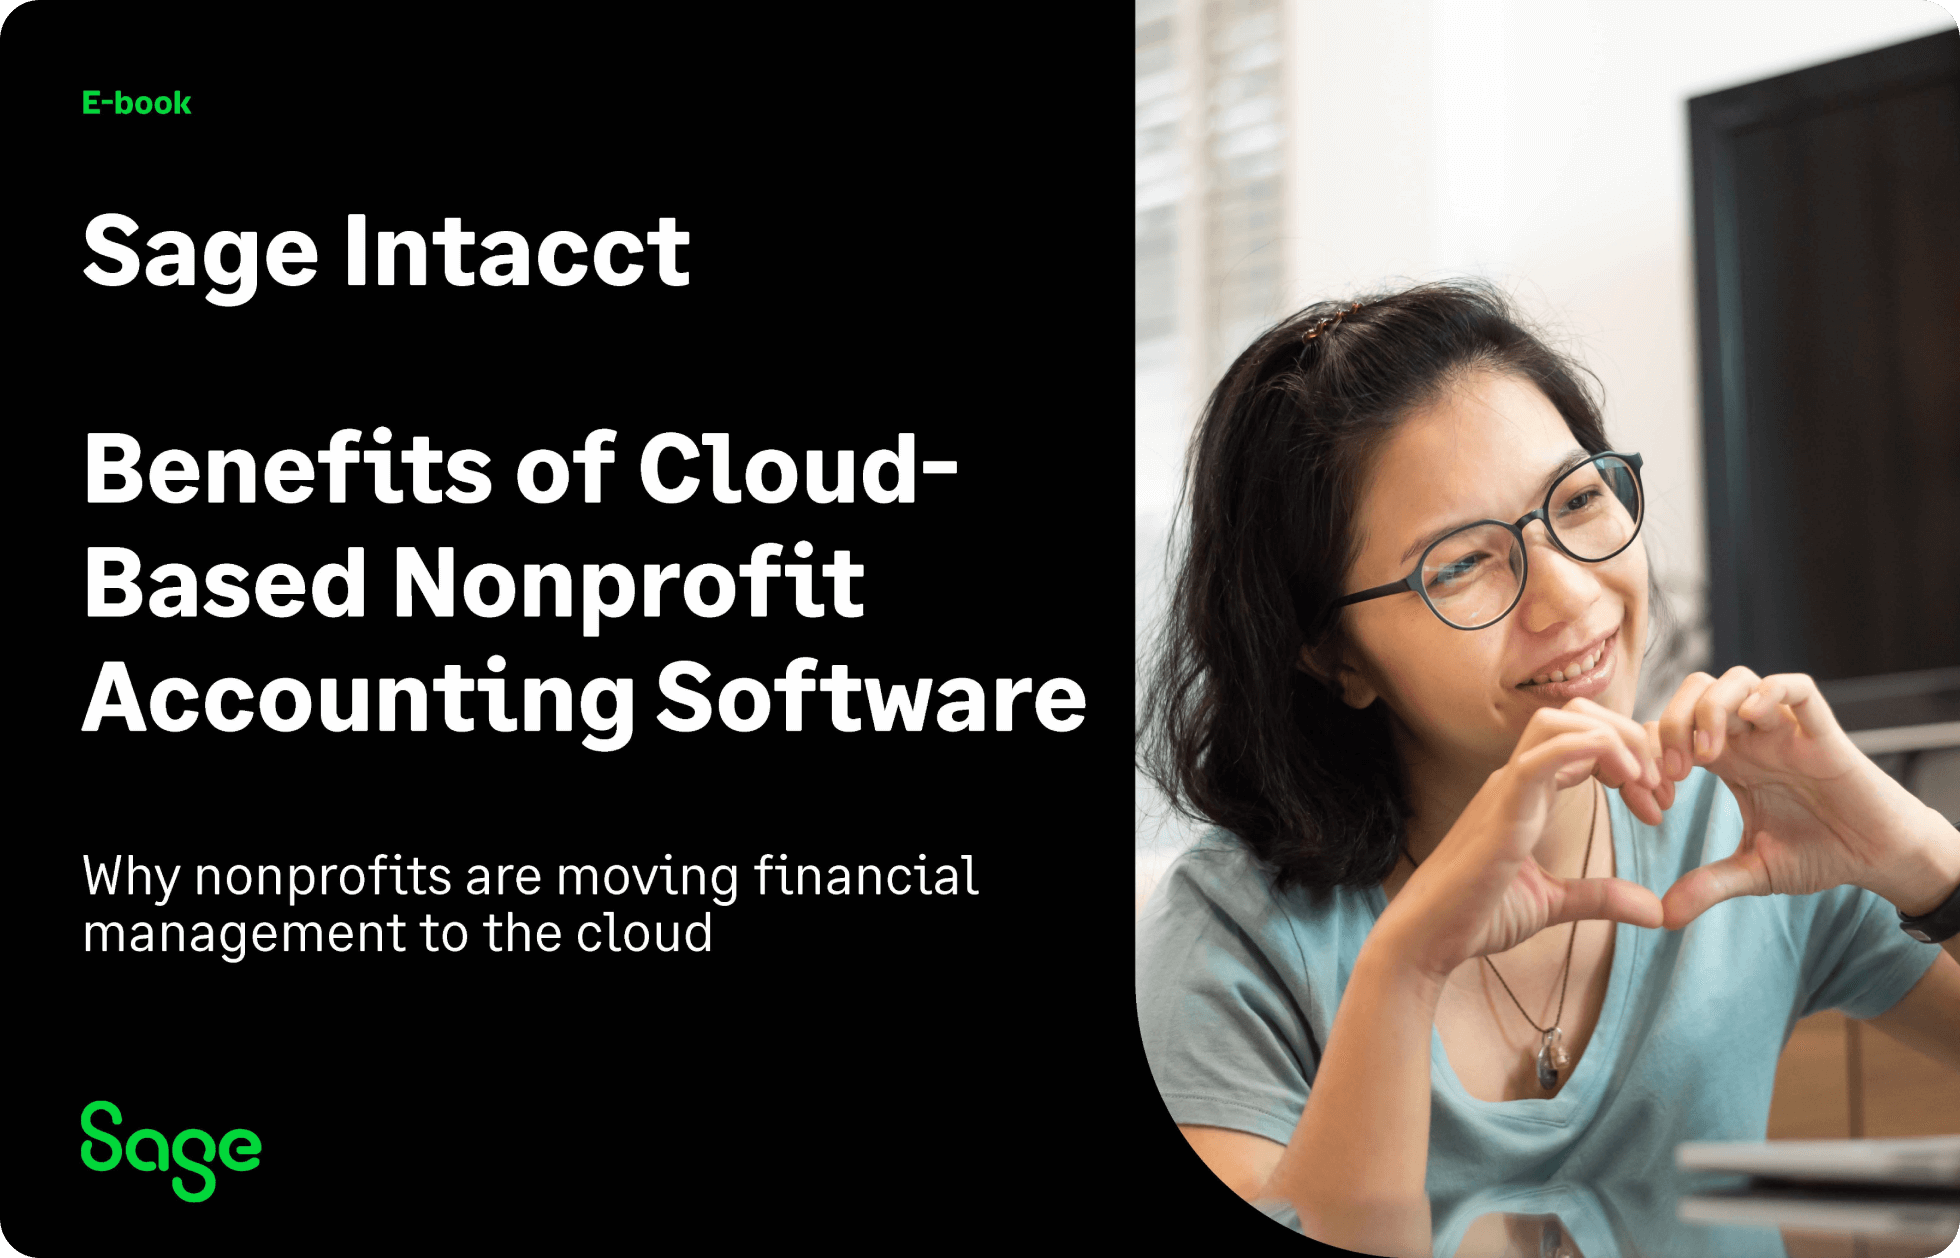 Benefits of cloud-based nonprofit accounting software